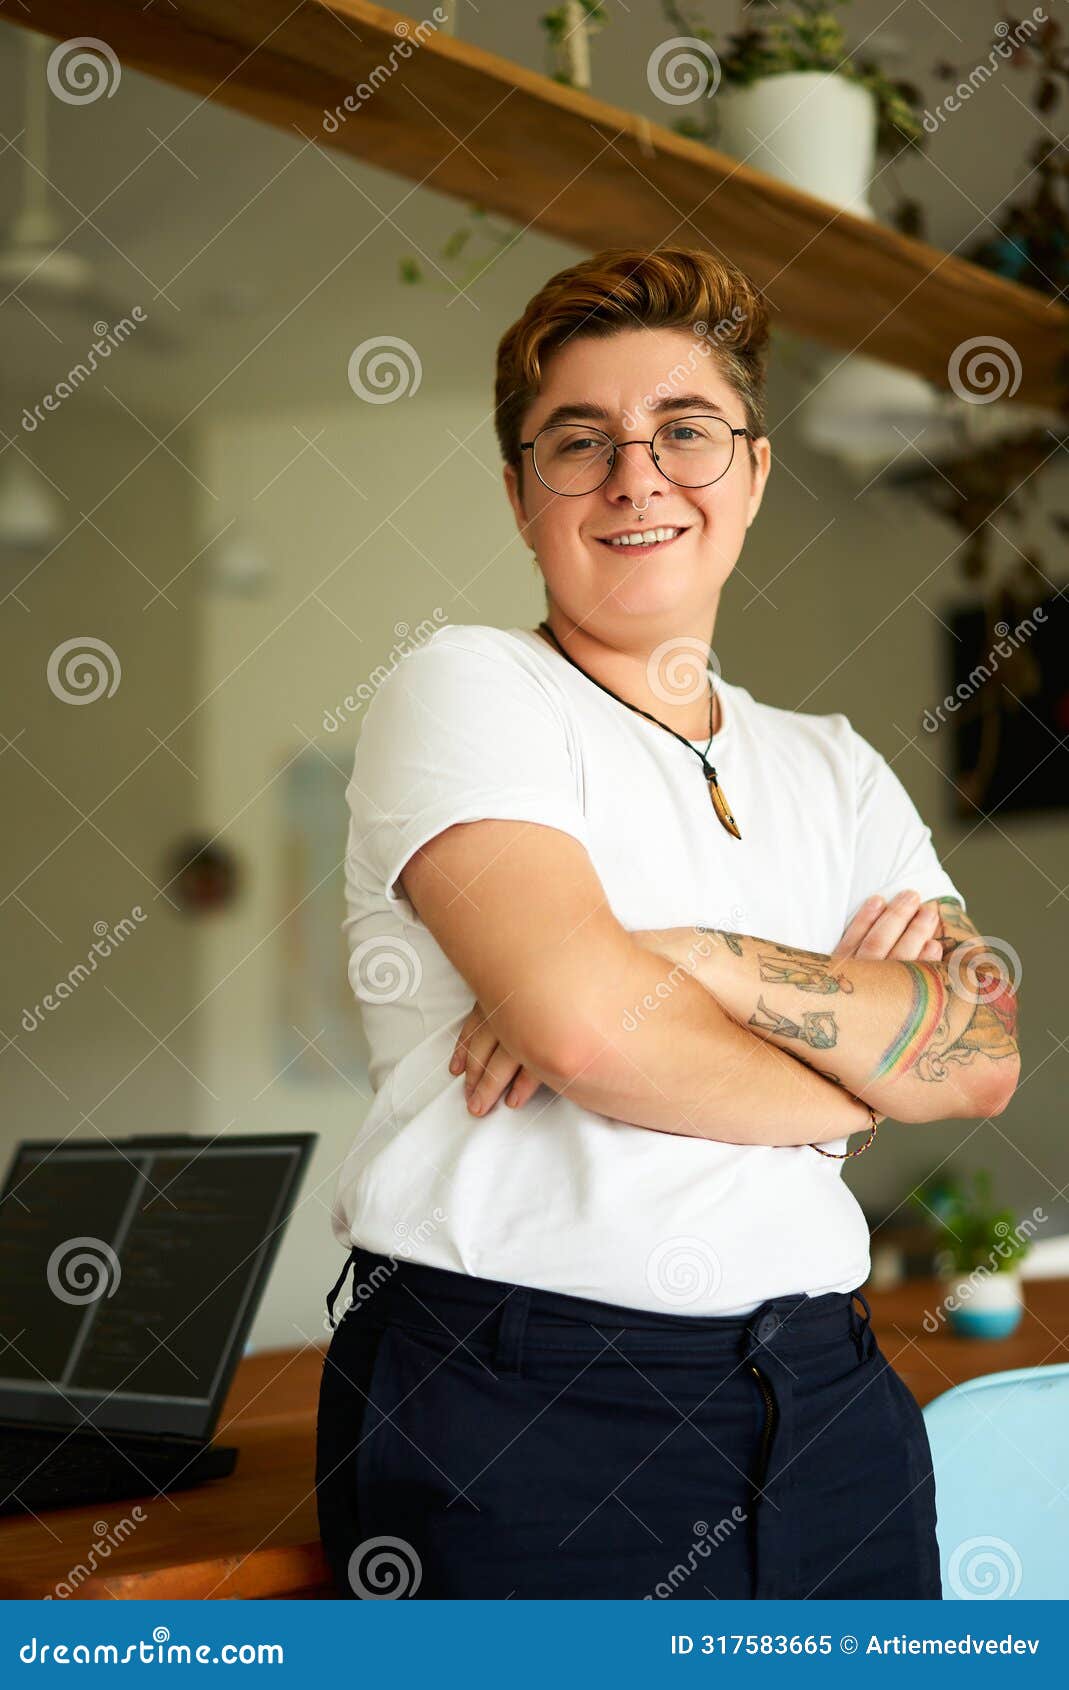 confident transgender pro in office attire stands with arms folded, smiling at camera. trans exec in well-lit workspace